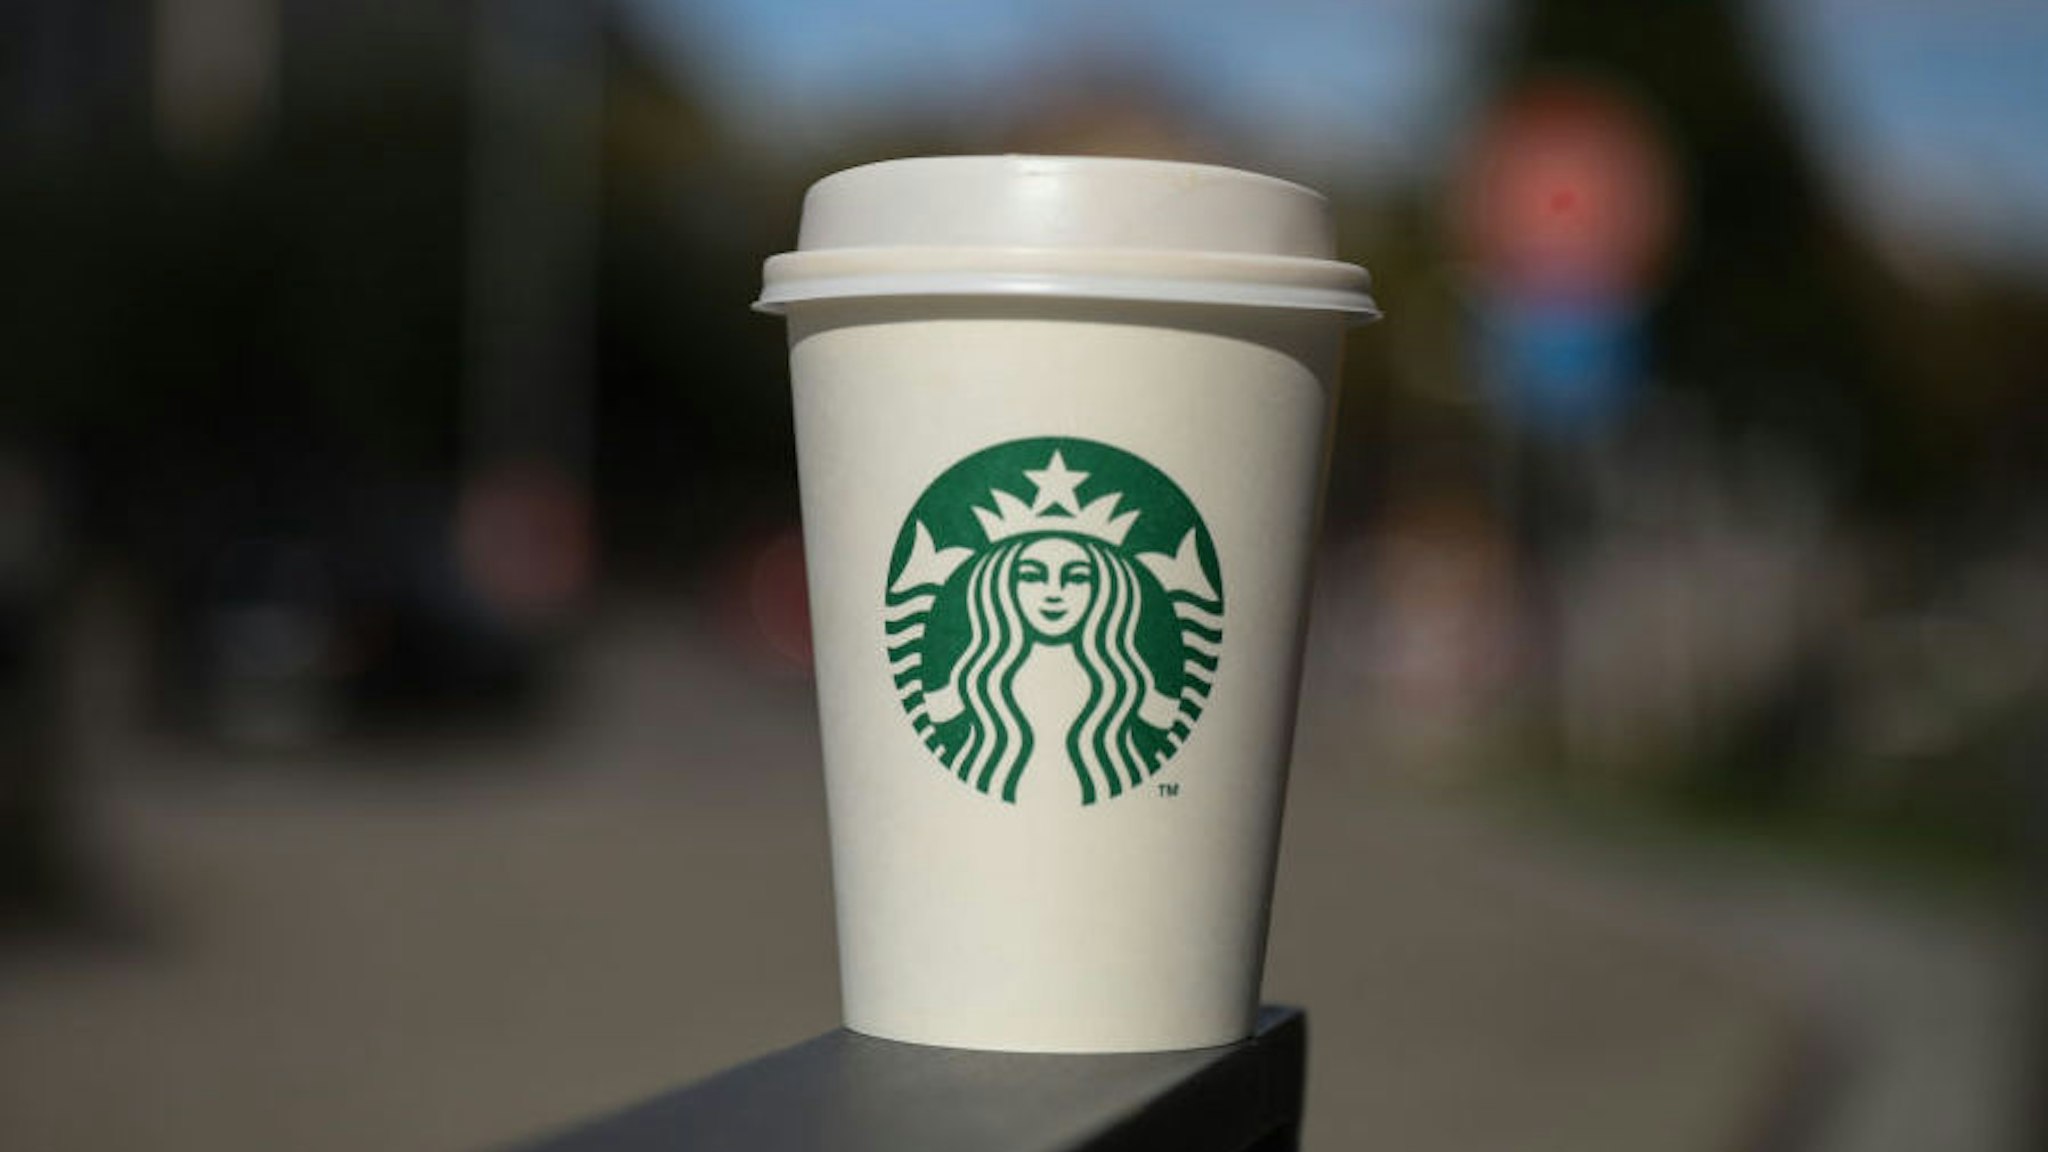 A Starbucks Coffe Cup is seen in Stuttgart, Germany on October 20, 2019 (Photo by AB/NurPhoto via Getty Images)